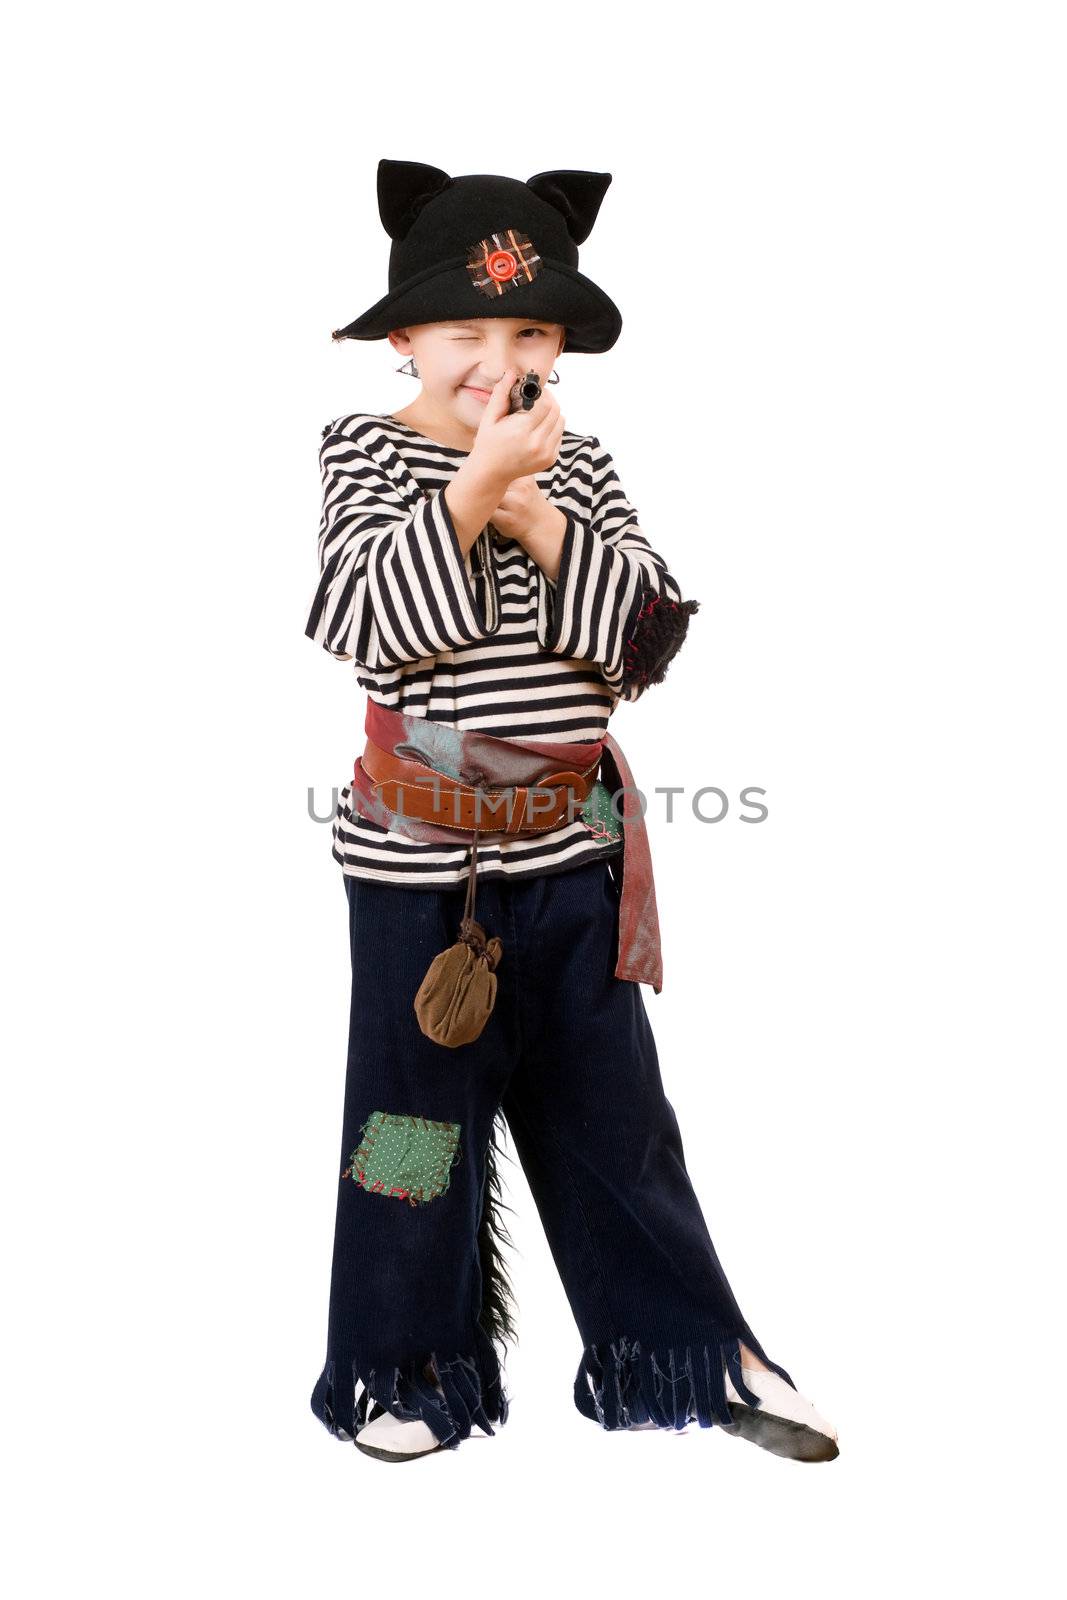 Boy with gun dressed as a pirate. Isolated on white